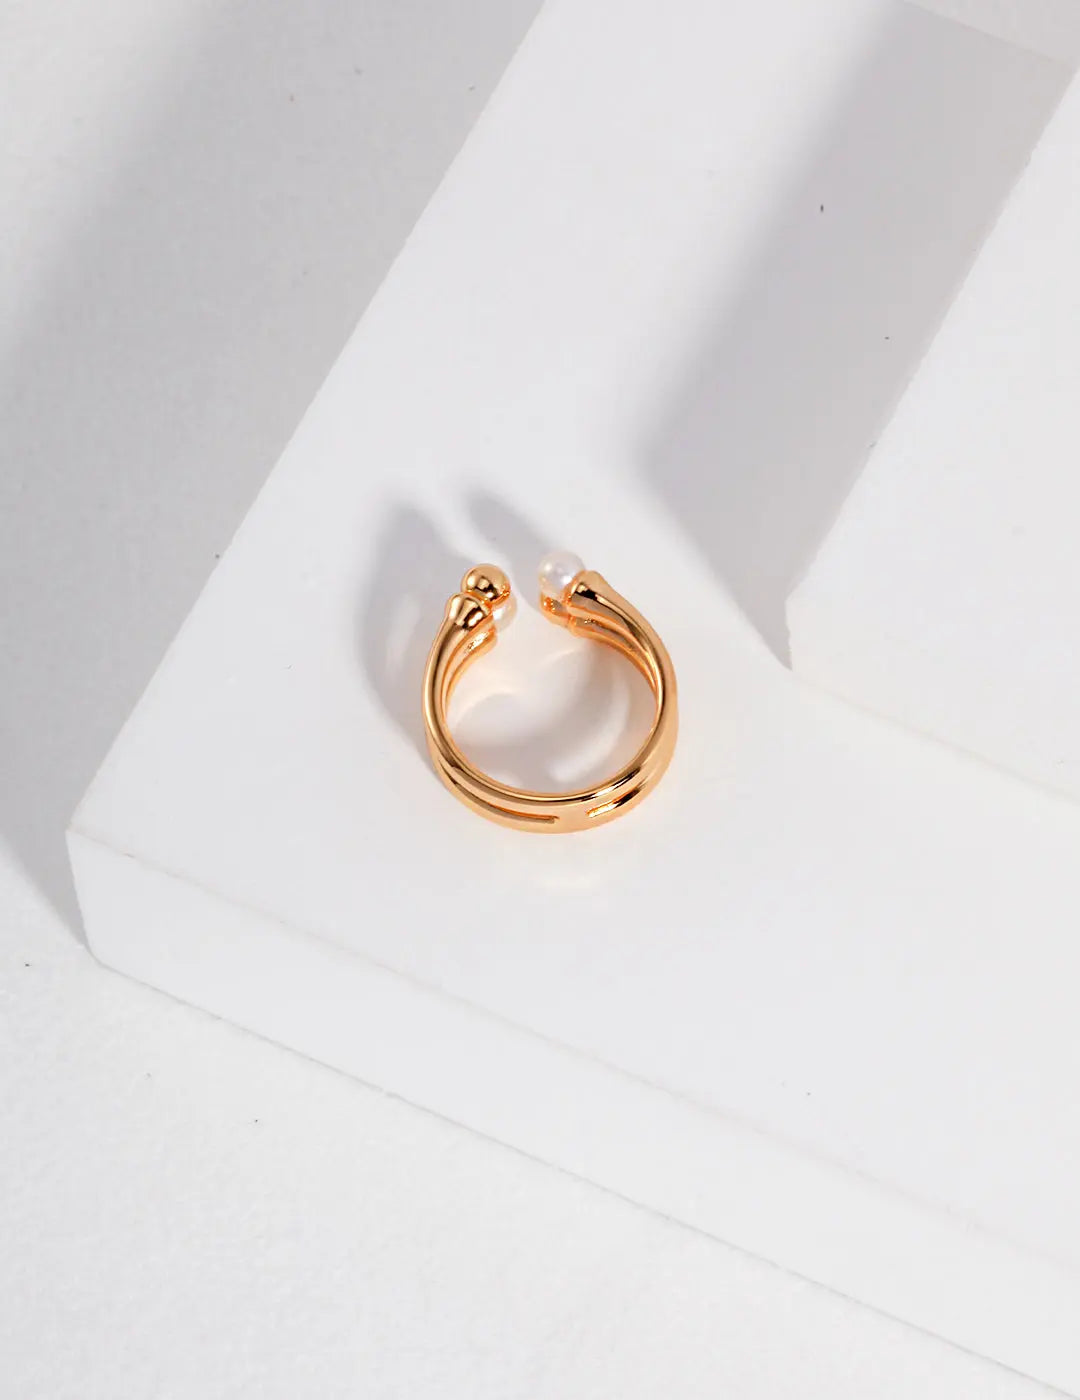 Double layer silver gold vermeil open ring with asymmetrical freshwater pearl